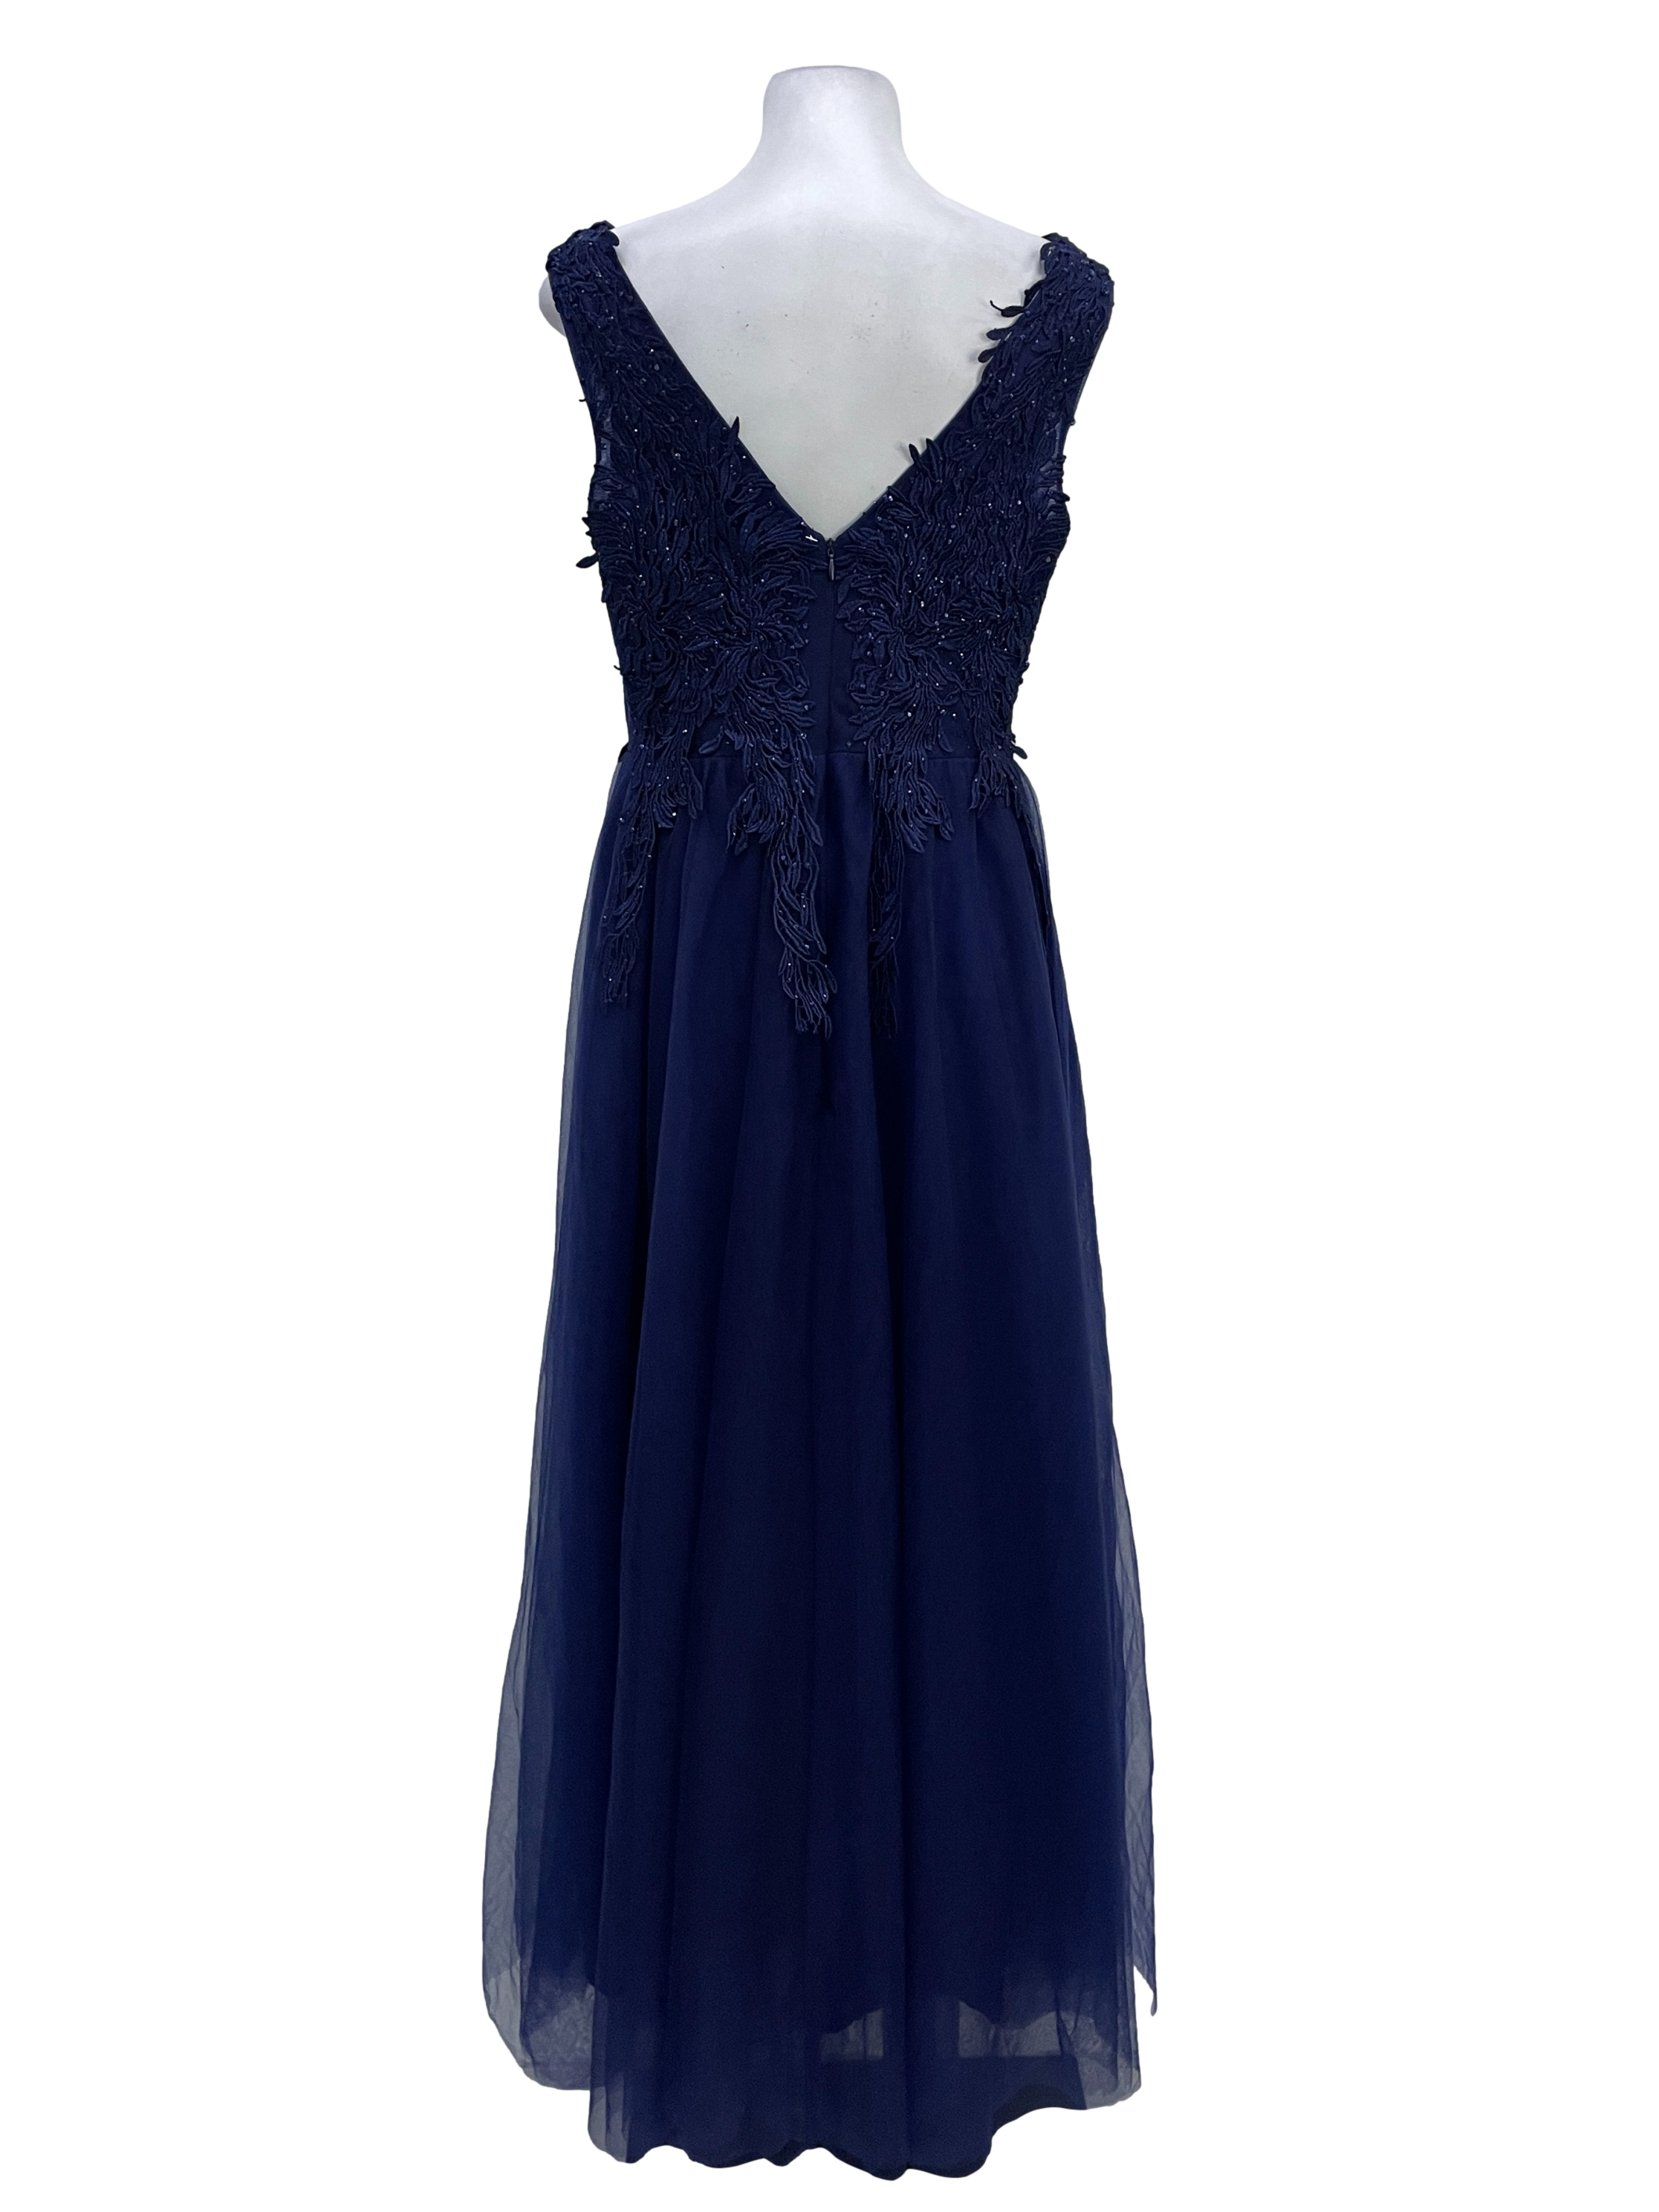 Navy Beaded Lace Long Gown Dress